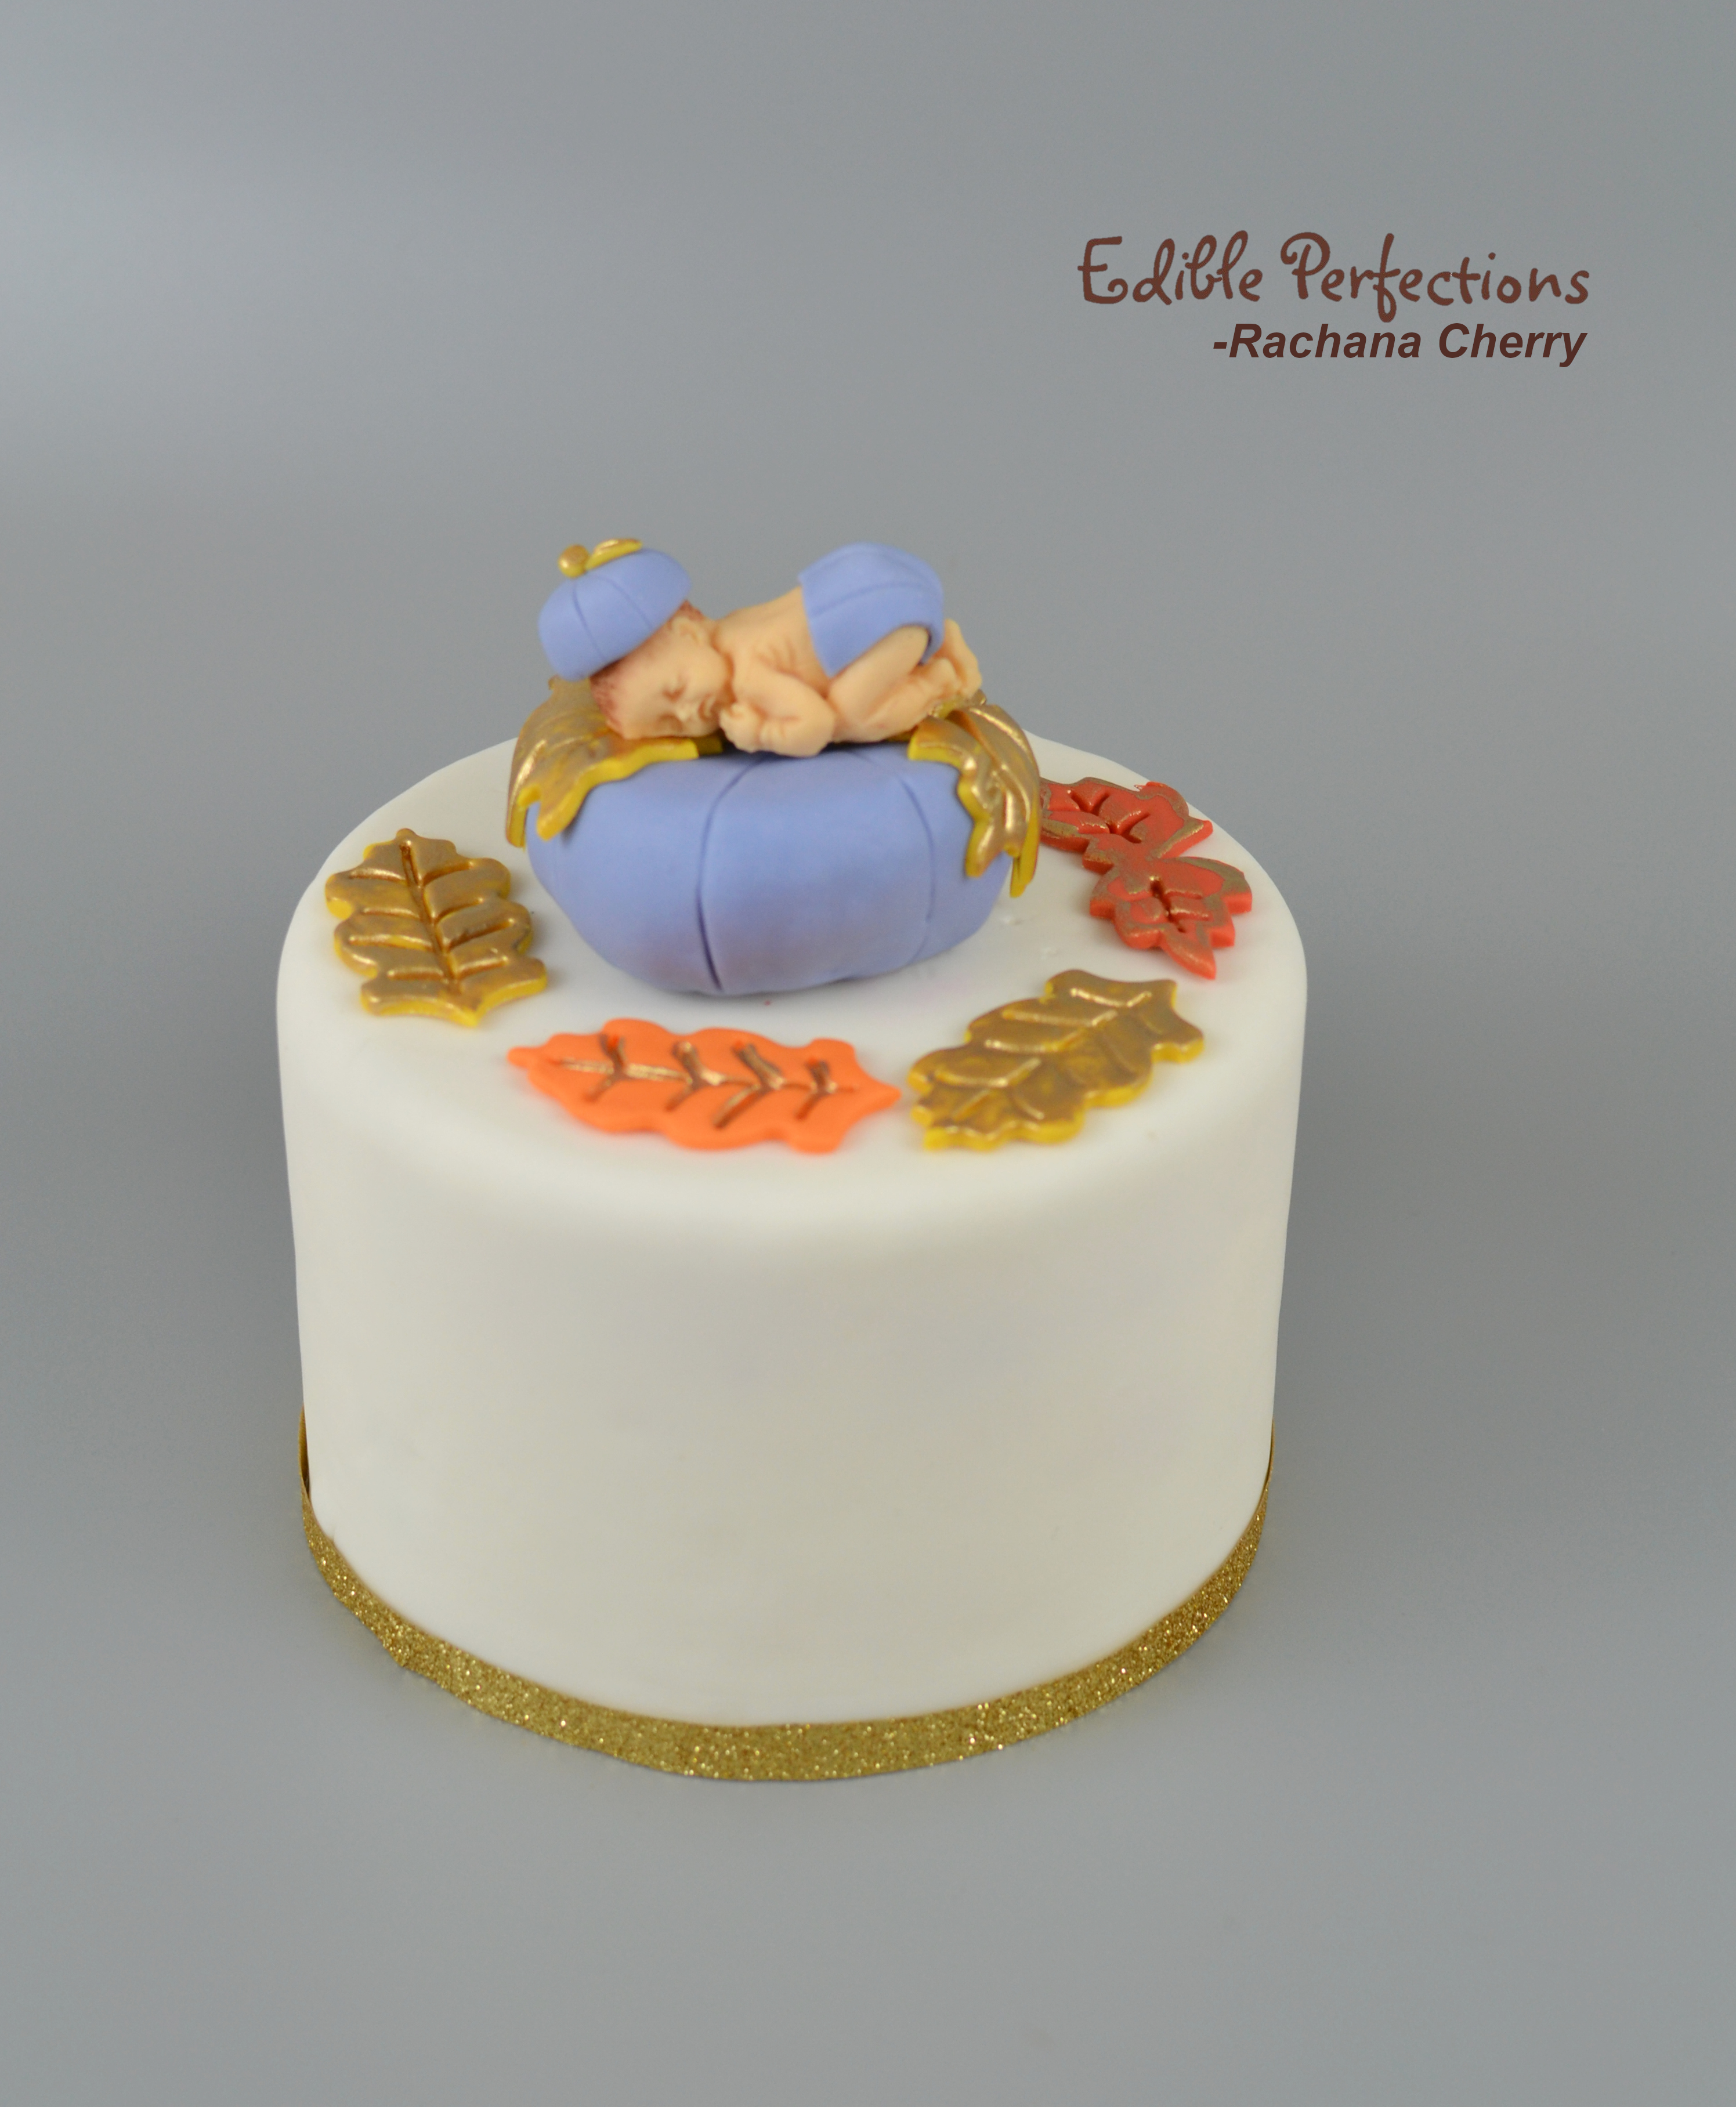 Pumpkin Baby Shower Cake Topper - Edible Perfections